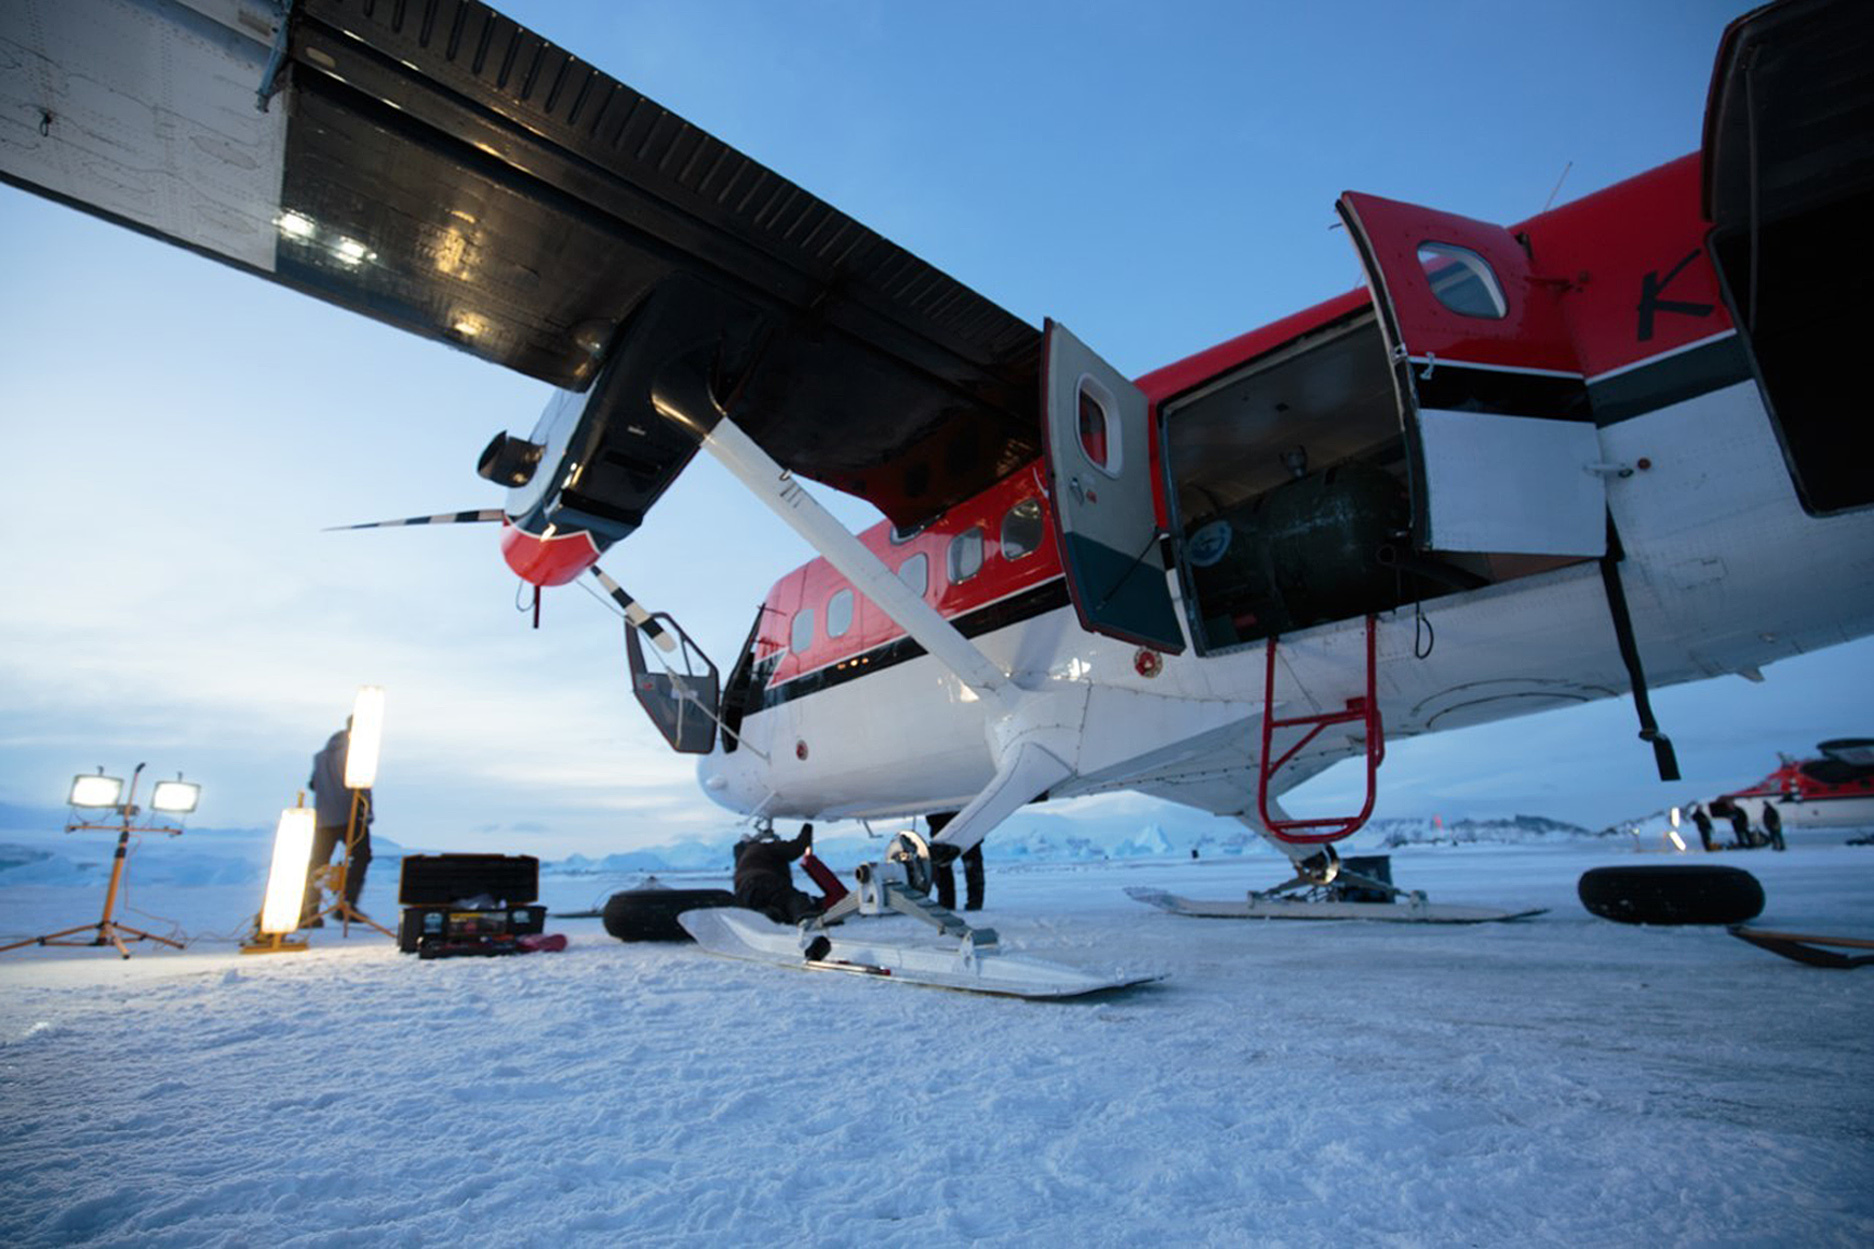 PHOTO: One of the two Canadian-owned Twin Otter turboprop planes used to help rescue two workers from a remote U.S. science station at the South Pole, is pictured June 22, 2016 at Rothera Research Station in Antartica. 